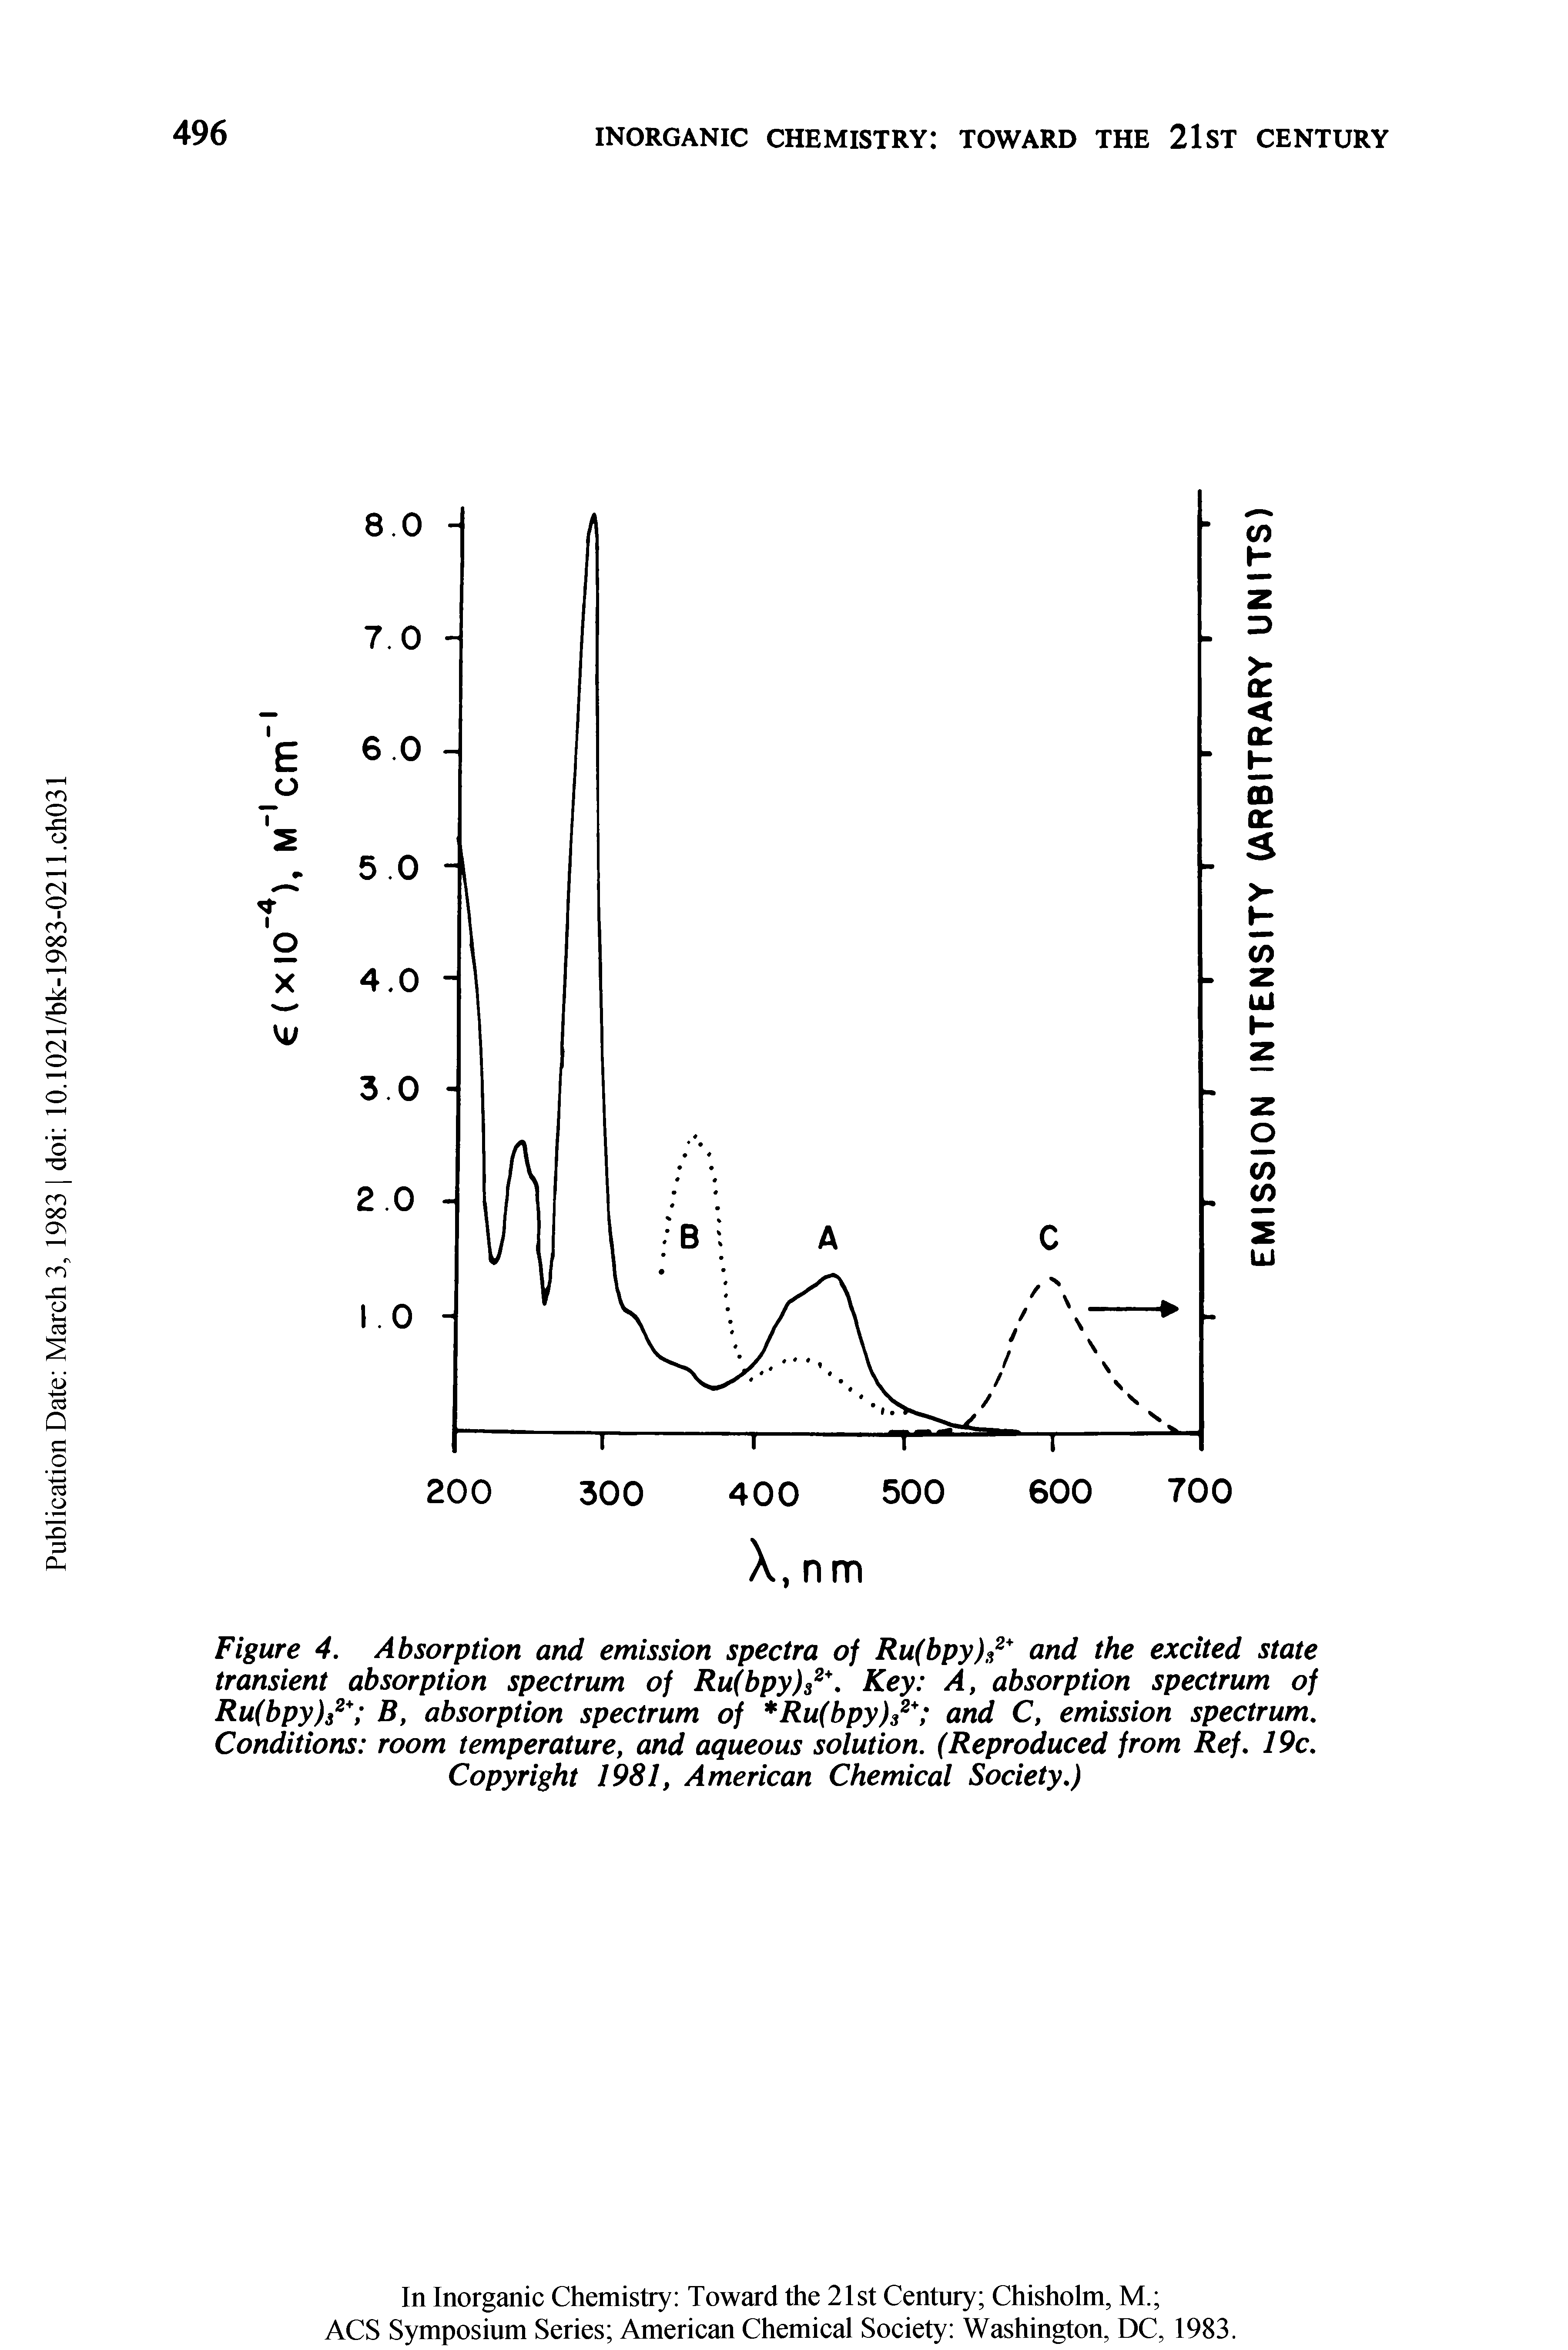 Figure 4. Absorption and emission spectra of Ru(bpy)s2+ and the excited state transient absorption spectrum of Ru(bpy)s2 Key A, absorption spectrum of Ru(bpy)s2V B, absorption spectrum of Ru(bpy)32+ and C, emission spectrum. Conditions room temperature, and aqueous solution. (Reproduced from Ref. 19c. Copyright 1981, American Chemical Society.)...